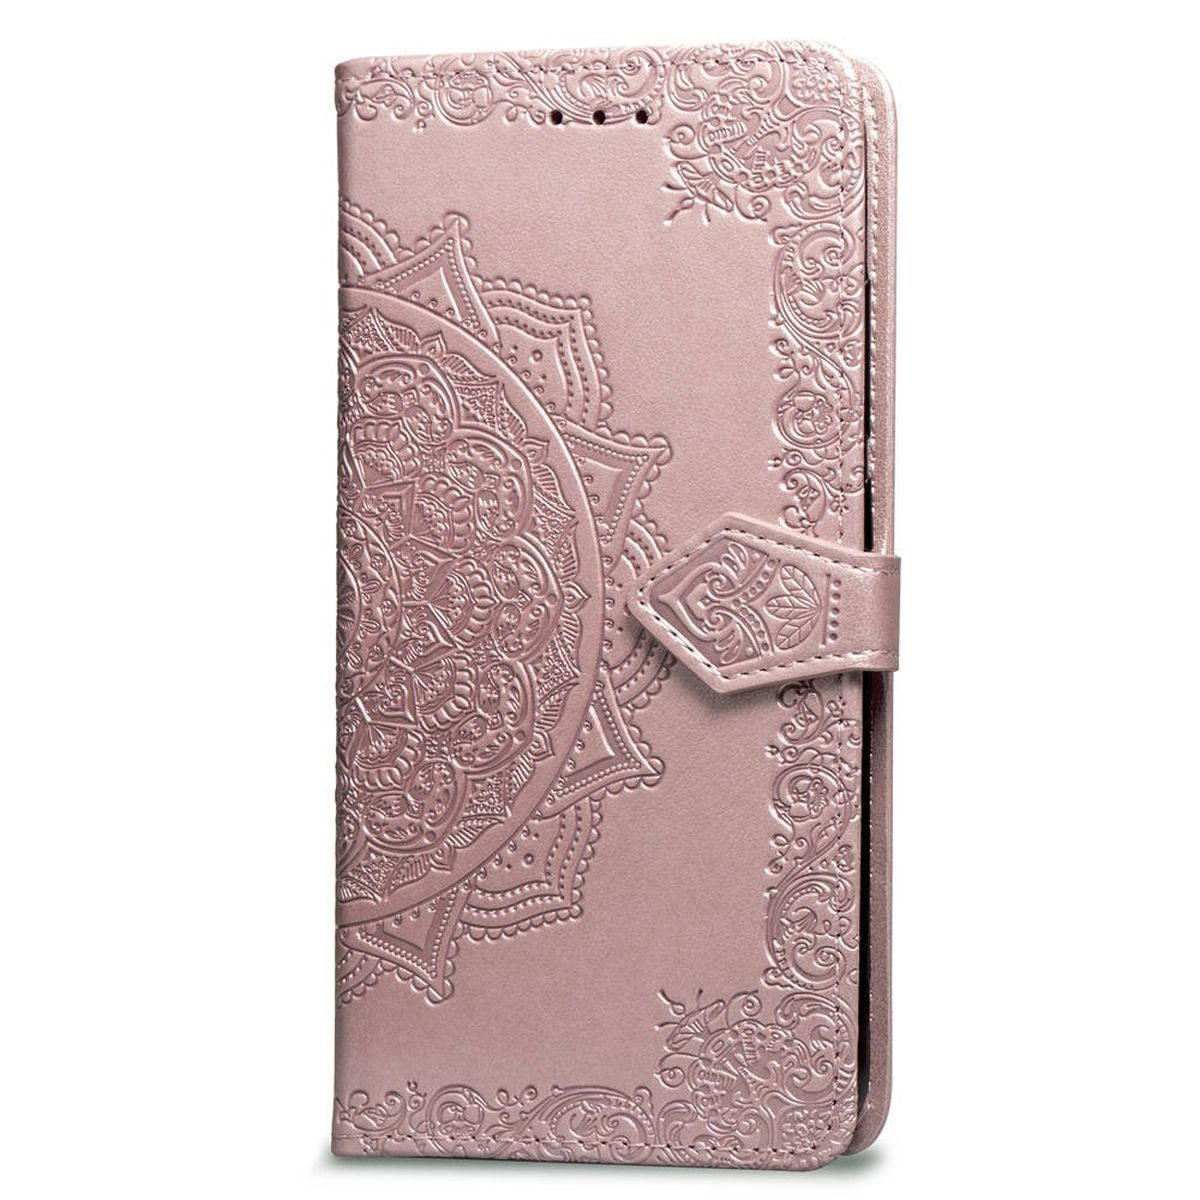 COVERKINGZ Klapphülle mit Mandala Apple, Rosegold Xs Max, Muster, iPhone Bookcover